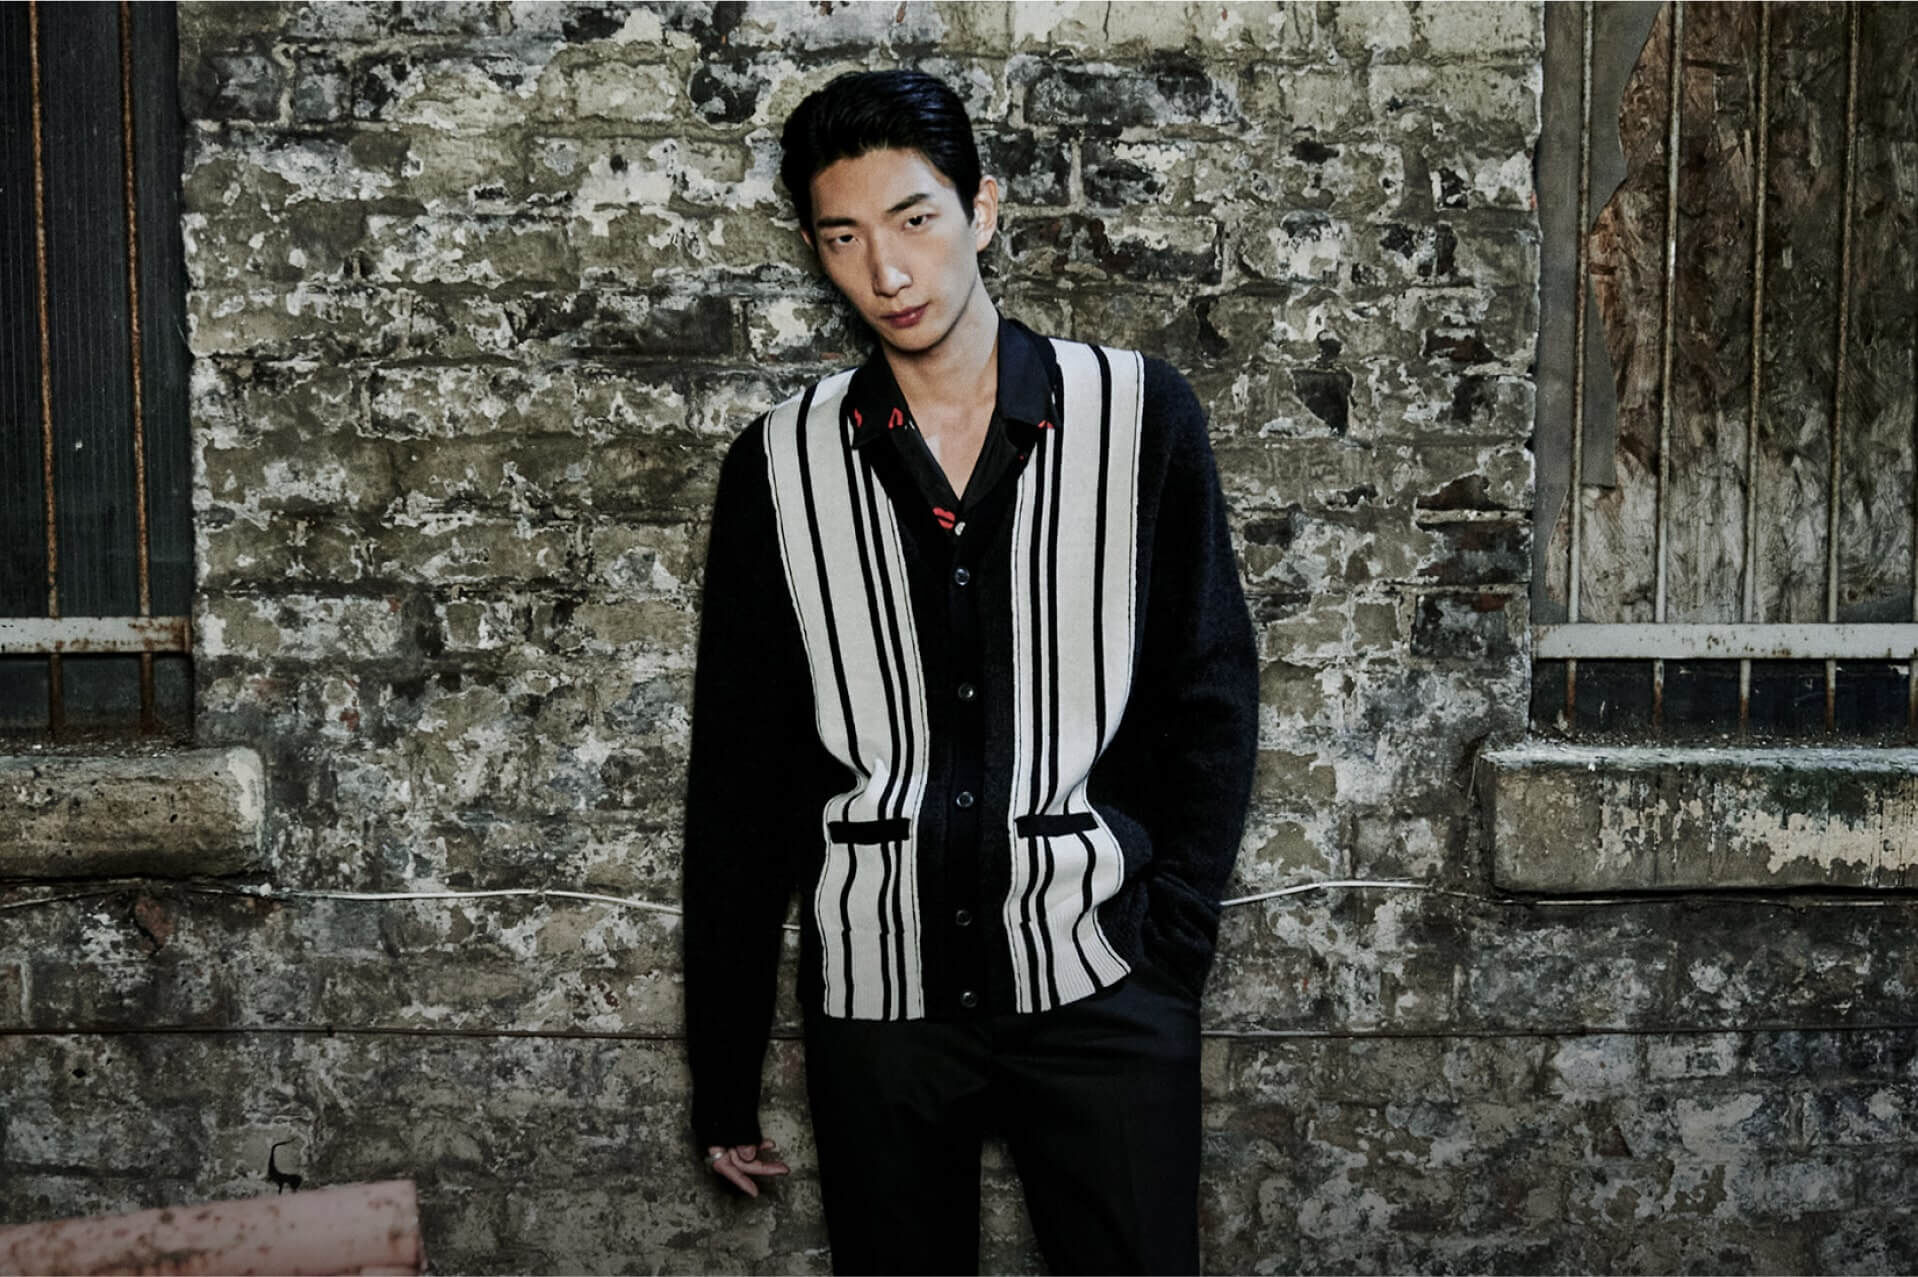 A man wearing a black and white striped cardigan leaning against a brick wall at night.